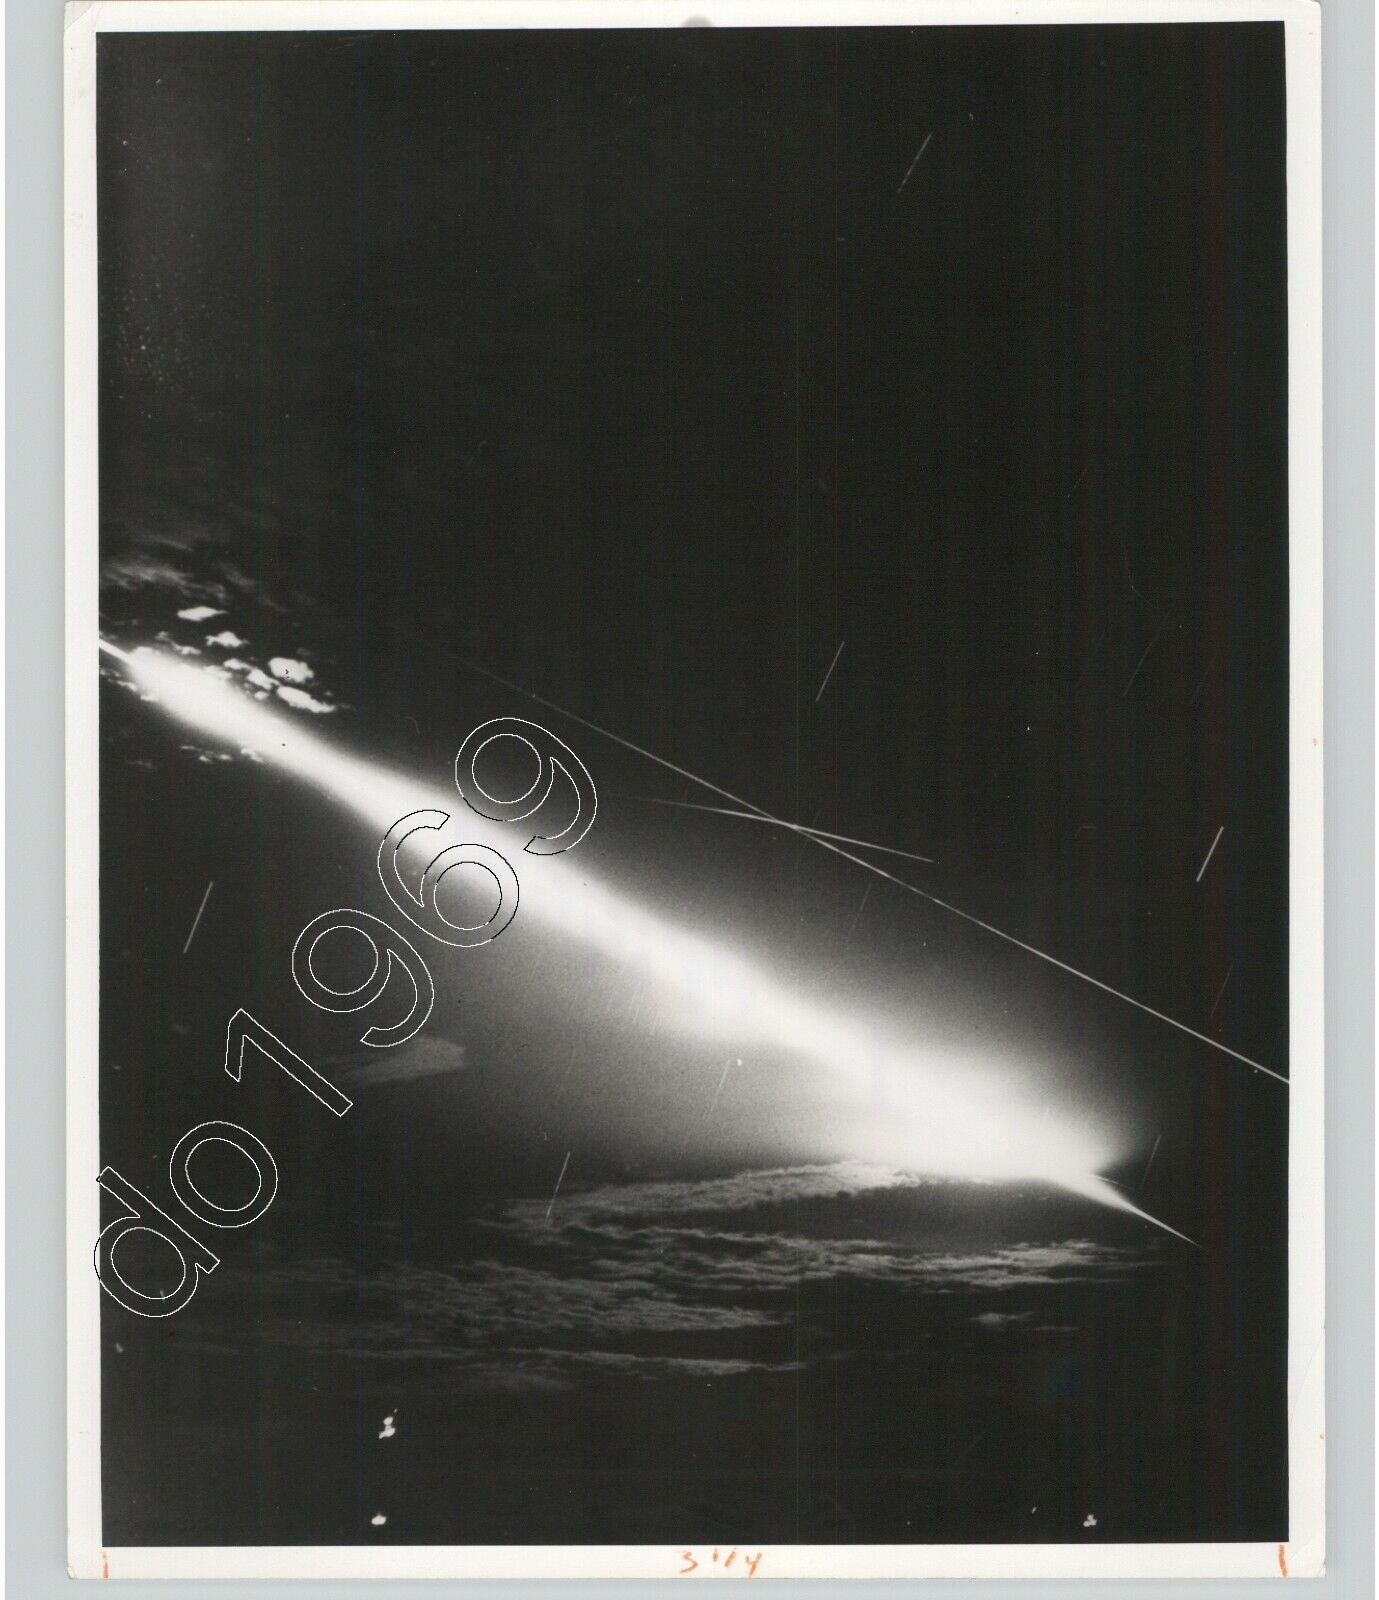 US ARMY’s NIKE ZEUS MISSILE INTERCEPT System In Action DEFENSE 1963 Press Photo